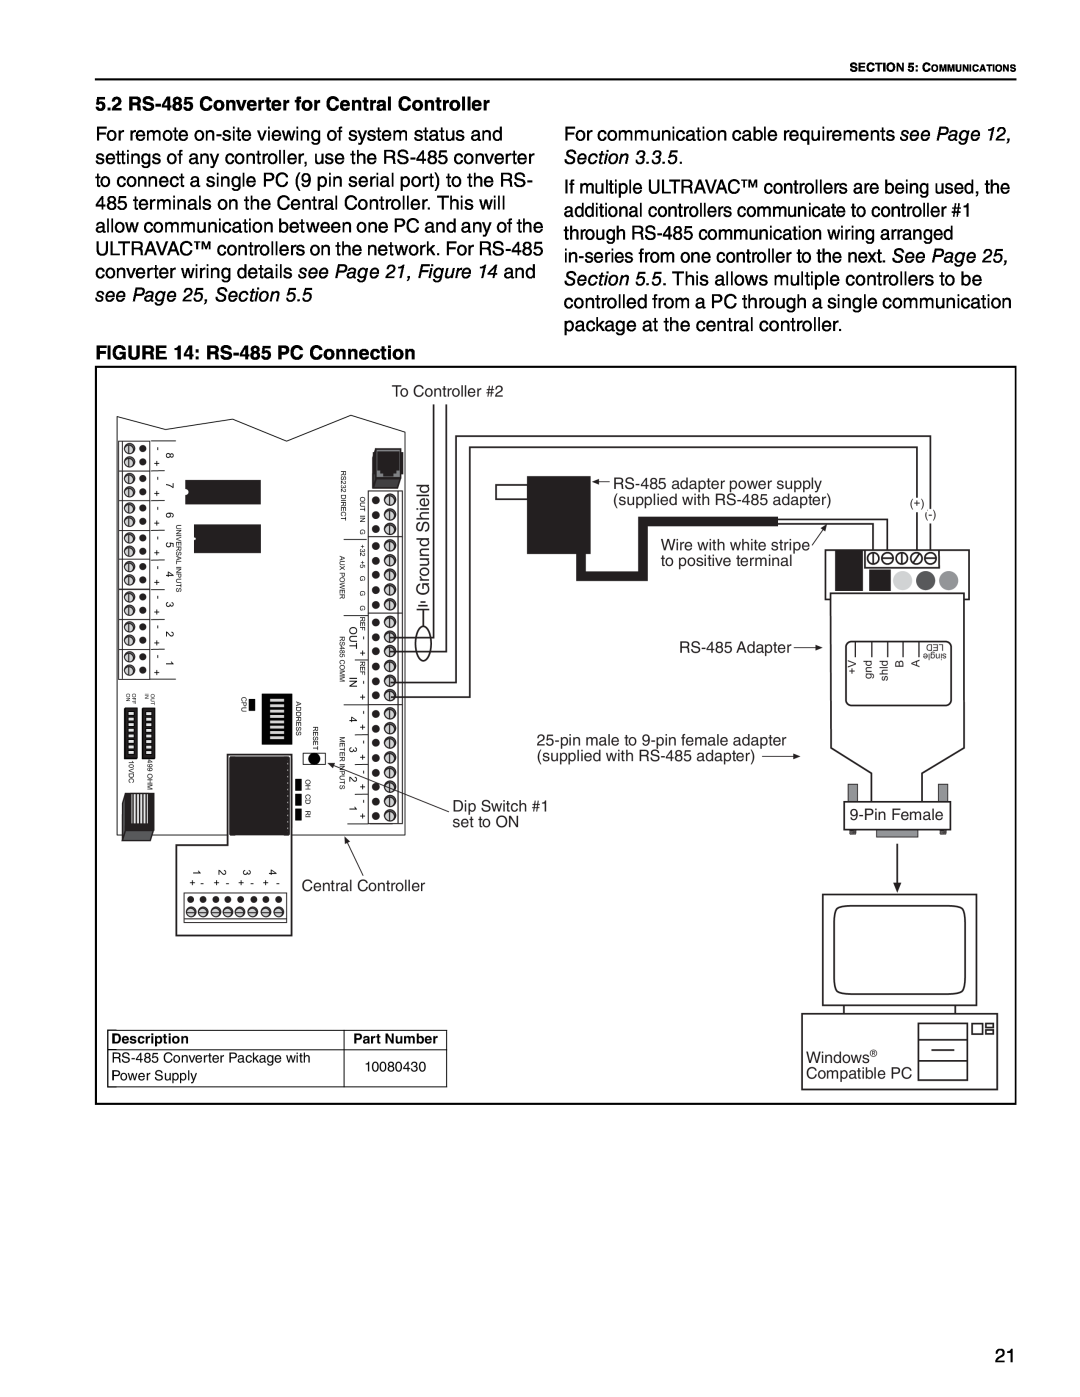 Roberts Gorden NEMA 4 installation manual 5.2 RS-485Converter for Central Controller, RS-485PC Connection 